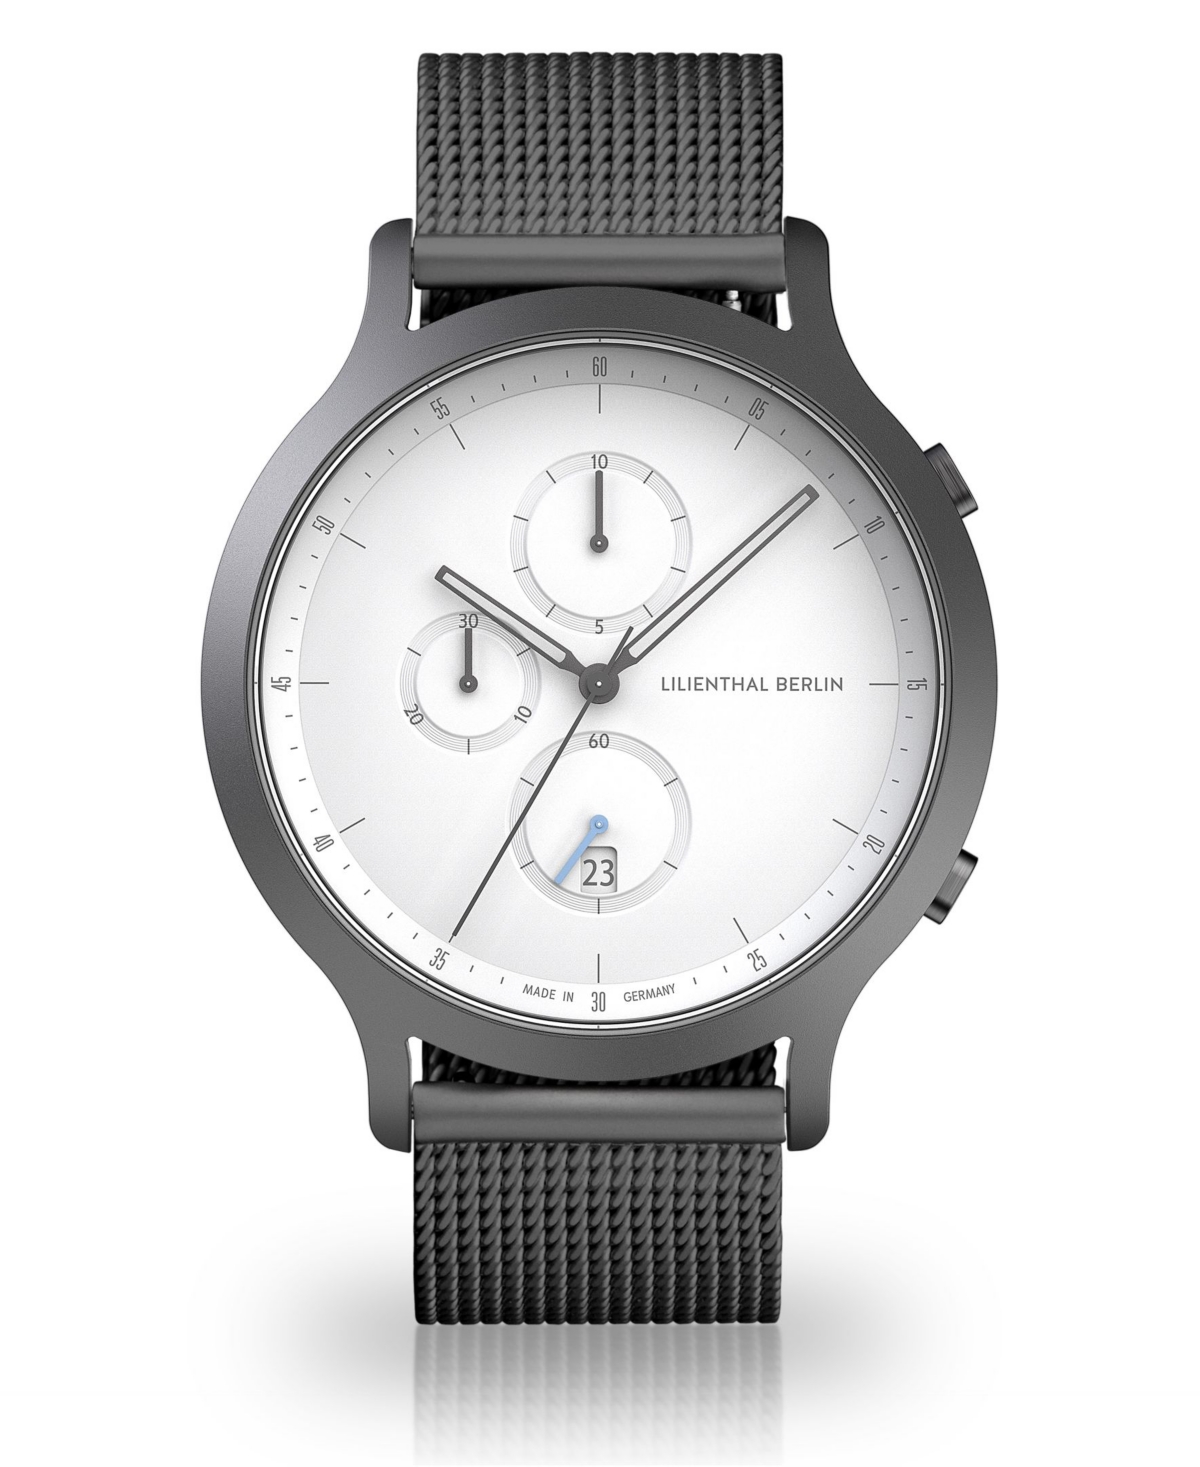 Lilienthal Berlin Silver Chronograph with Sliver-tone Stainless Steel Mesh Bracelet Watch, 42mm